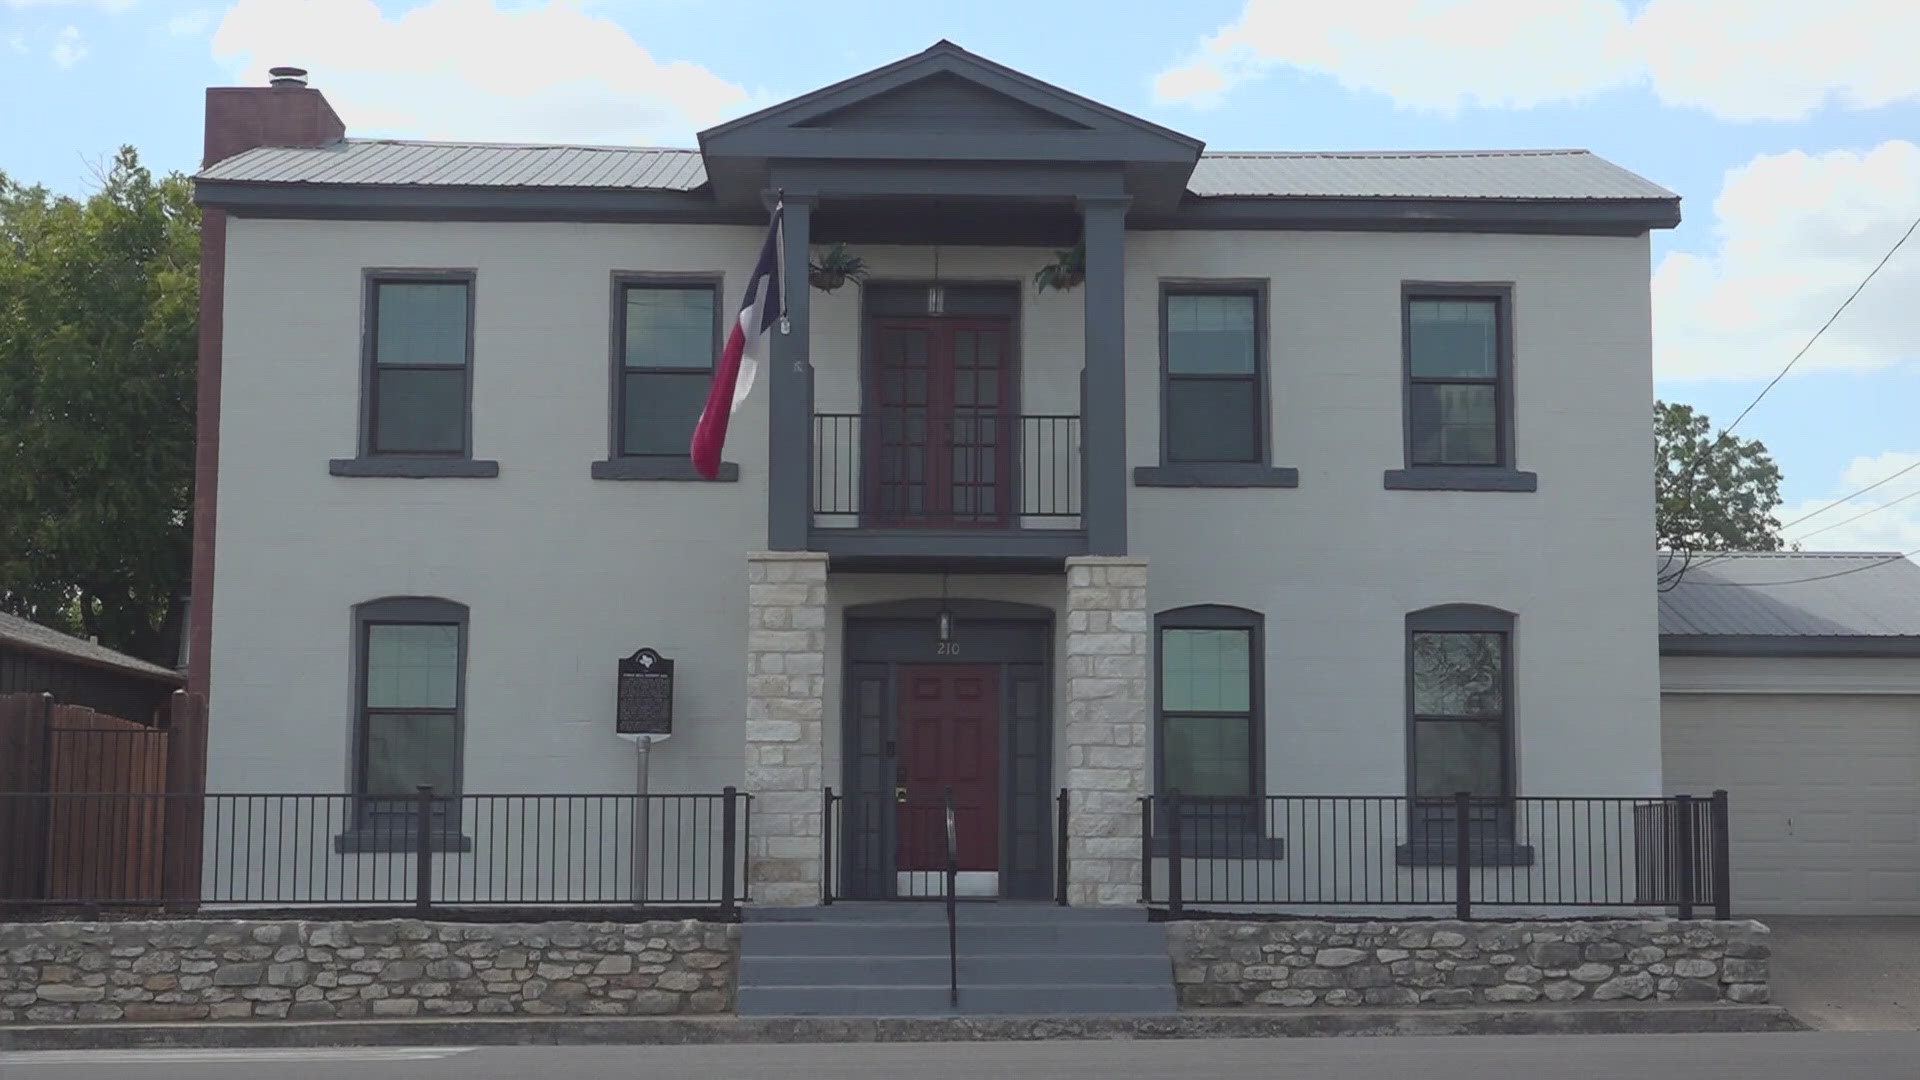 The "Clink on the Creek" in Belton, TX offers guests a chance to stay in a real historic Texas jail.